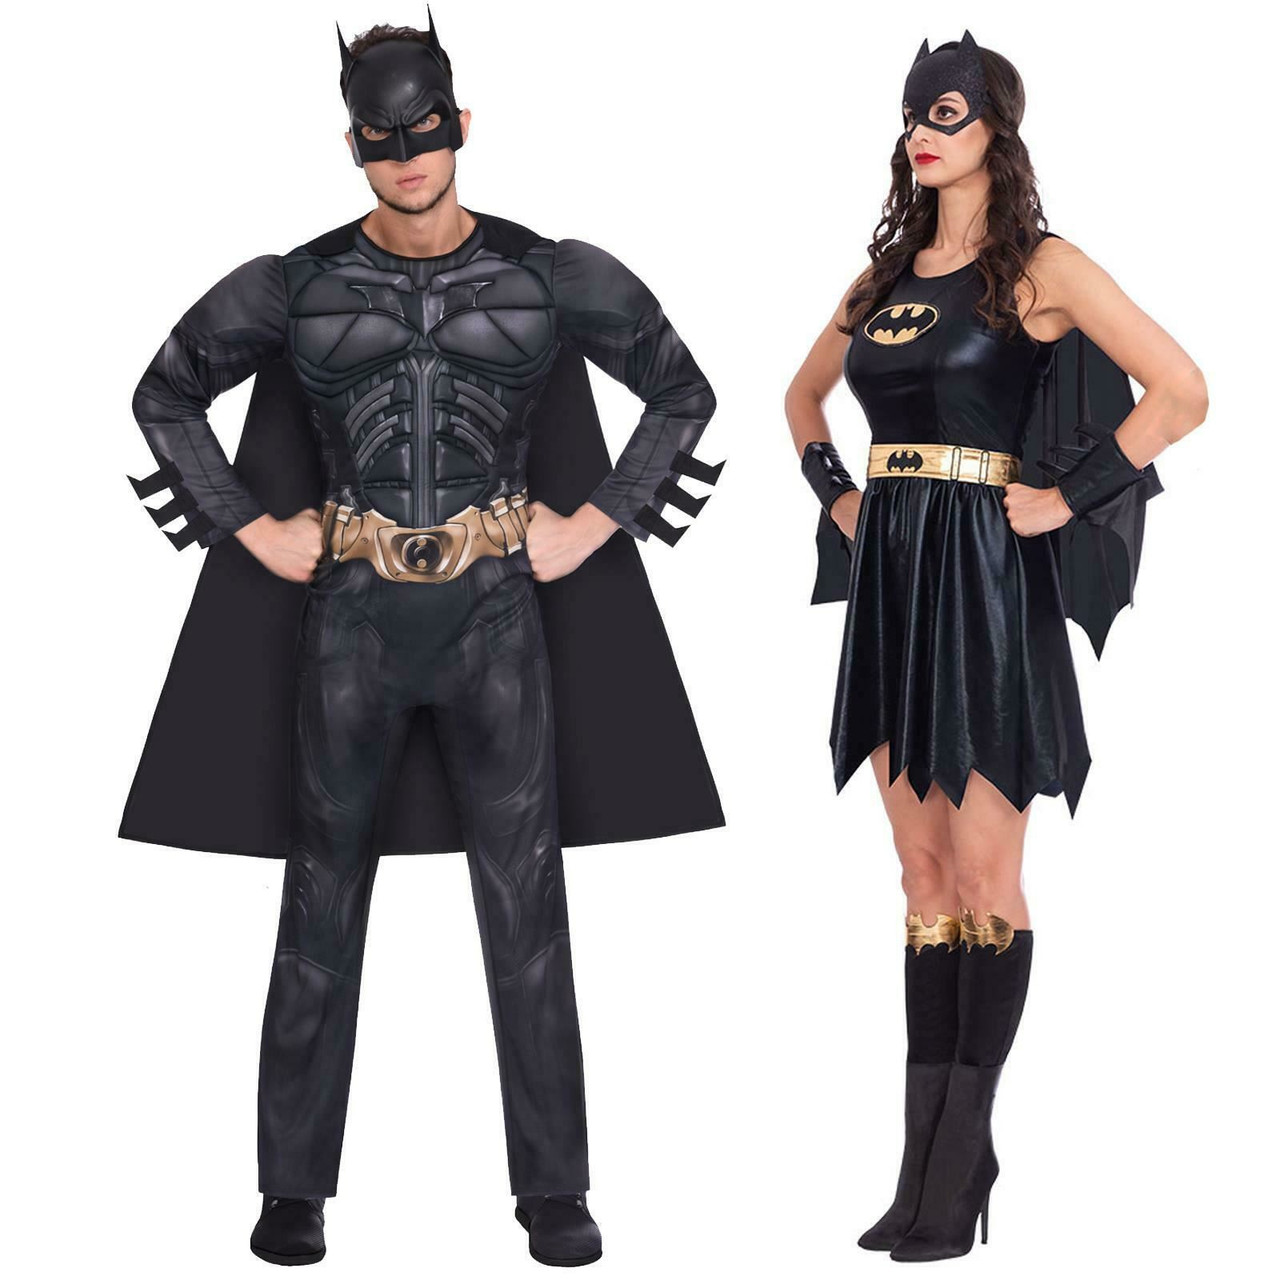 50 Best Fancy Dress Ideas for Students | Uni Compare